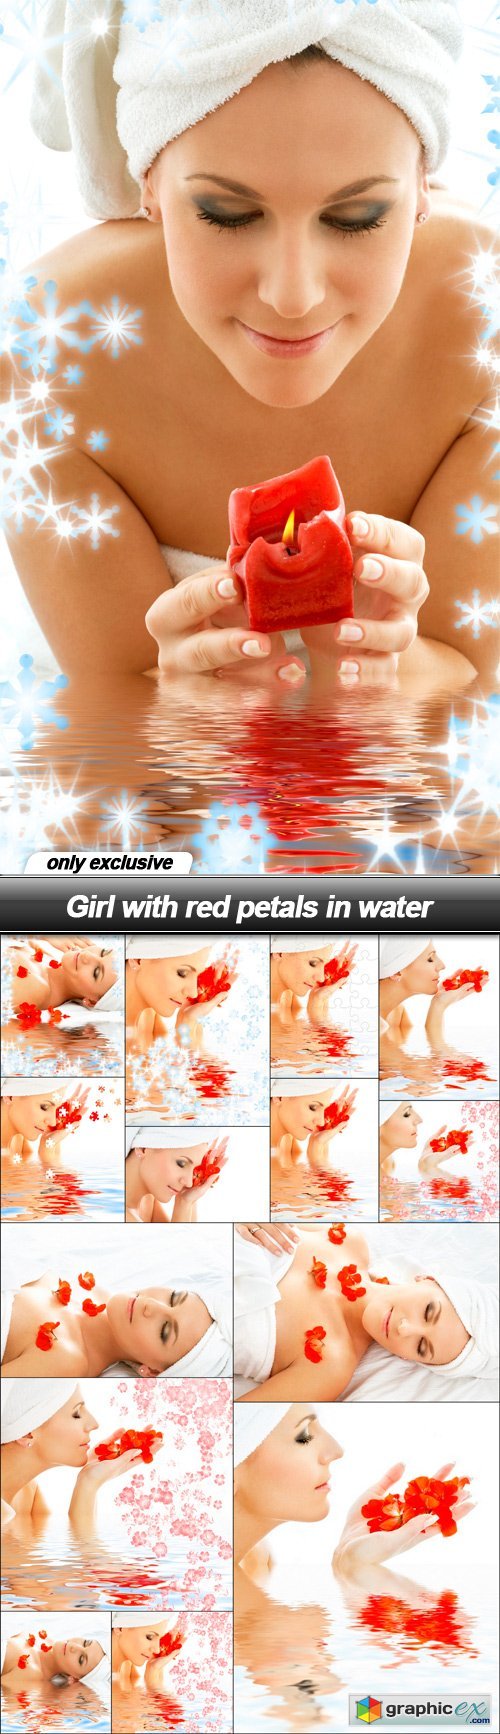 Girl with red petals in water - 15 UHQ JPEG